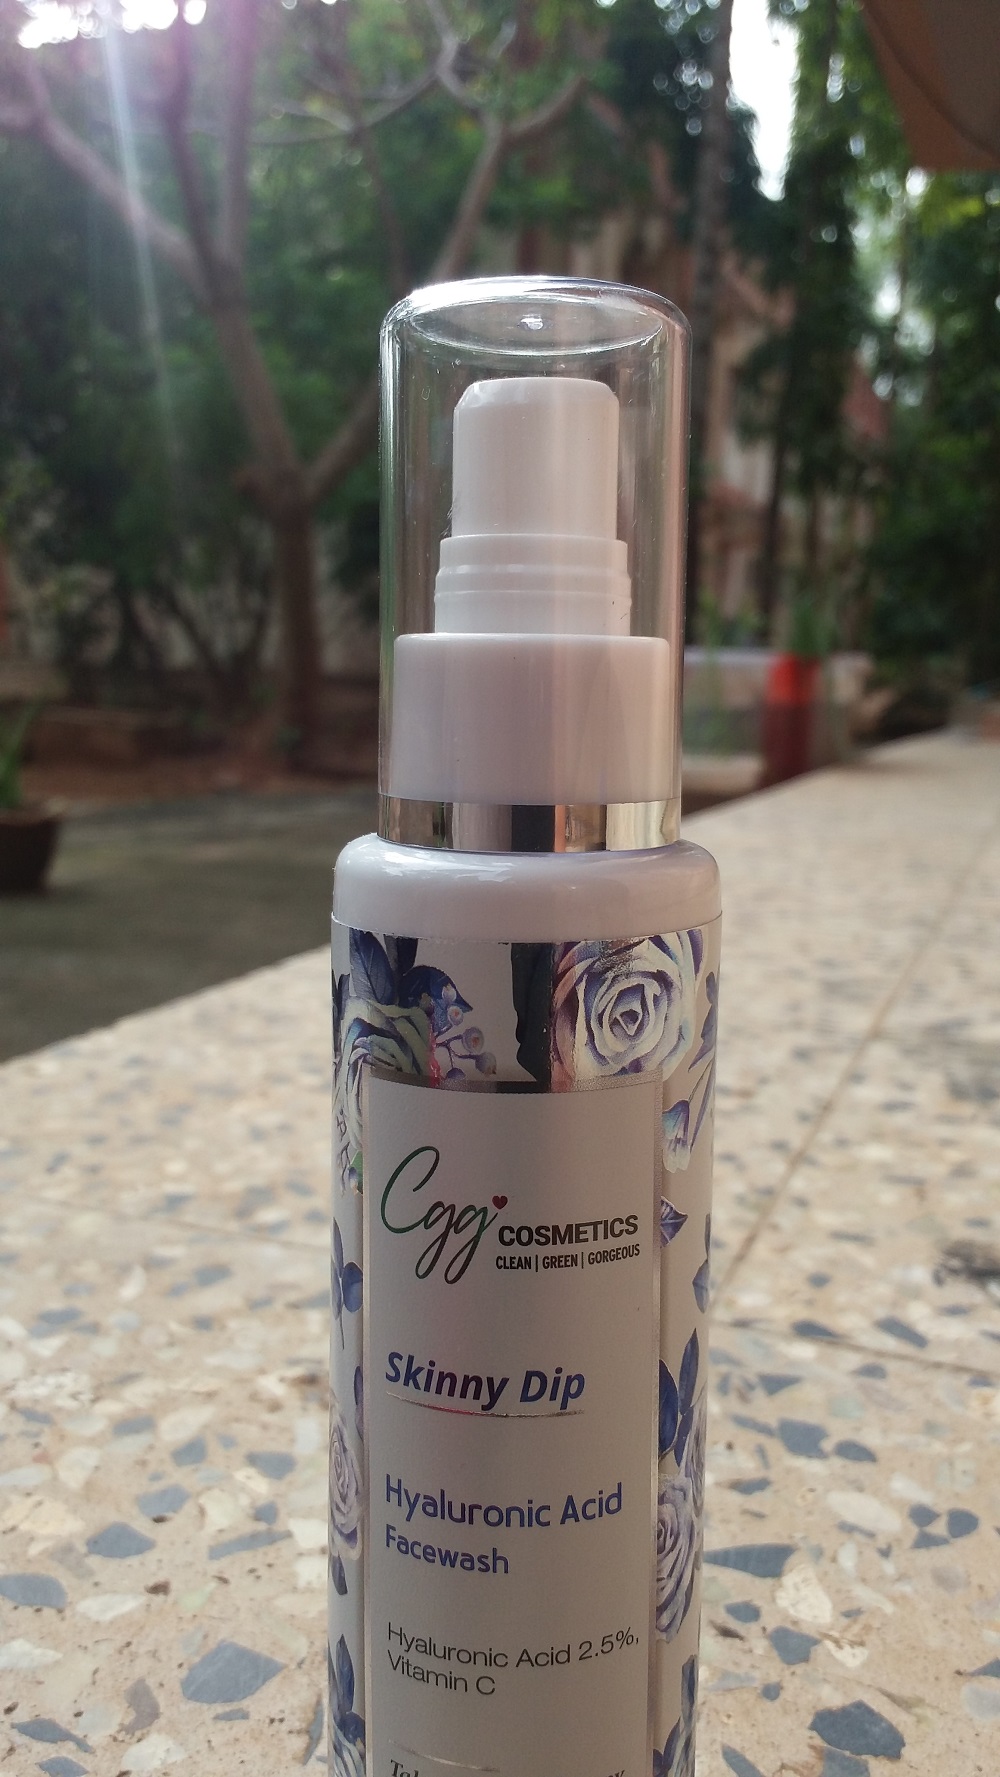  CGG cosmetics Hyaluronic Acid Face wash Review